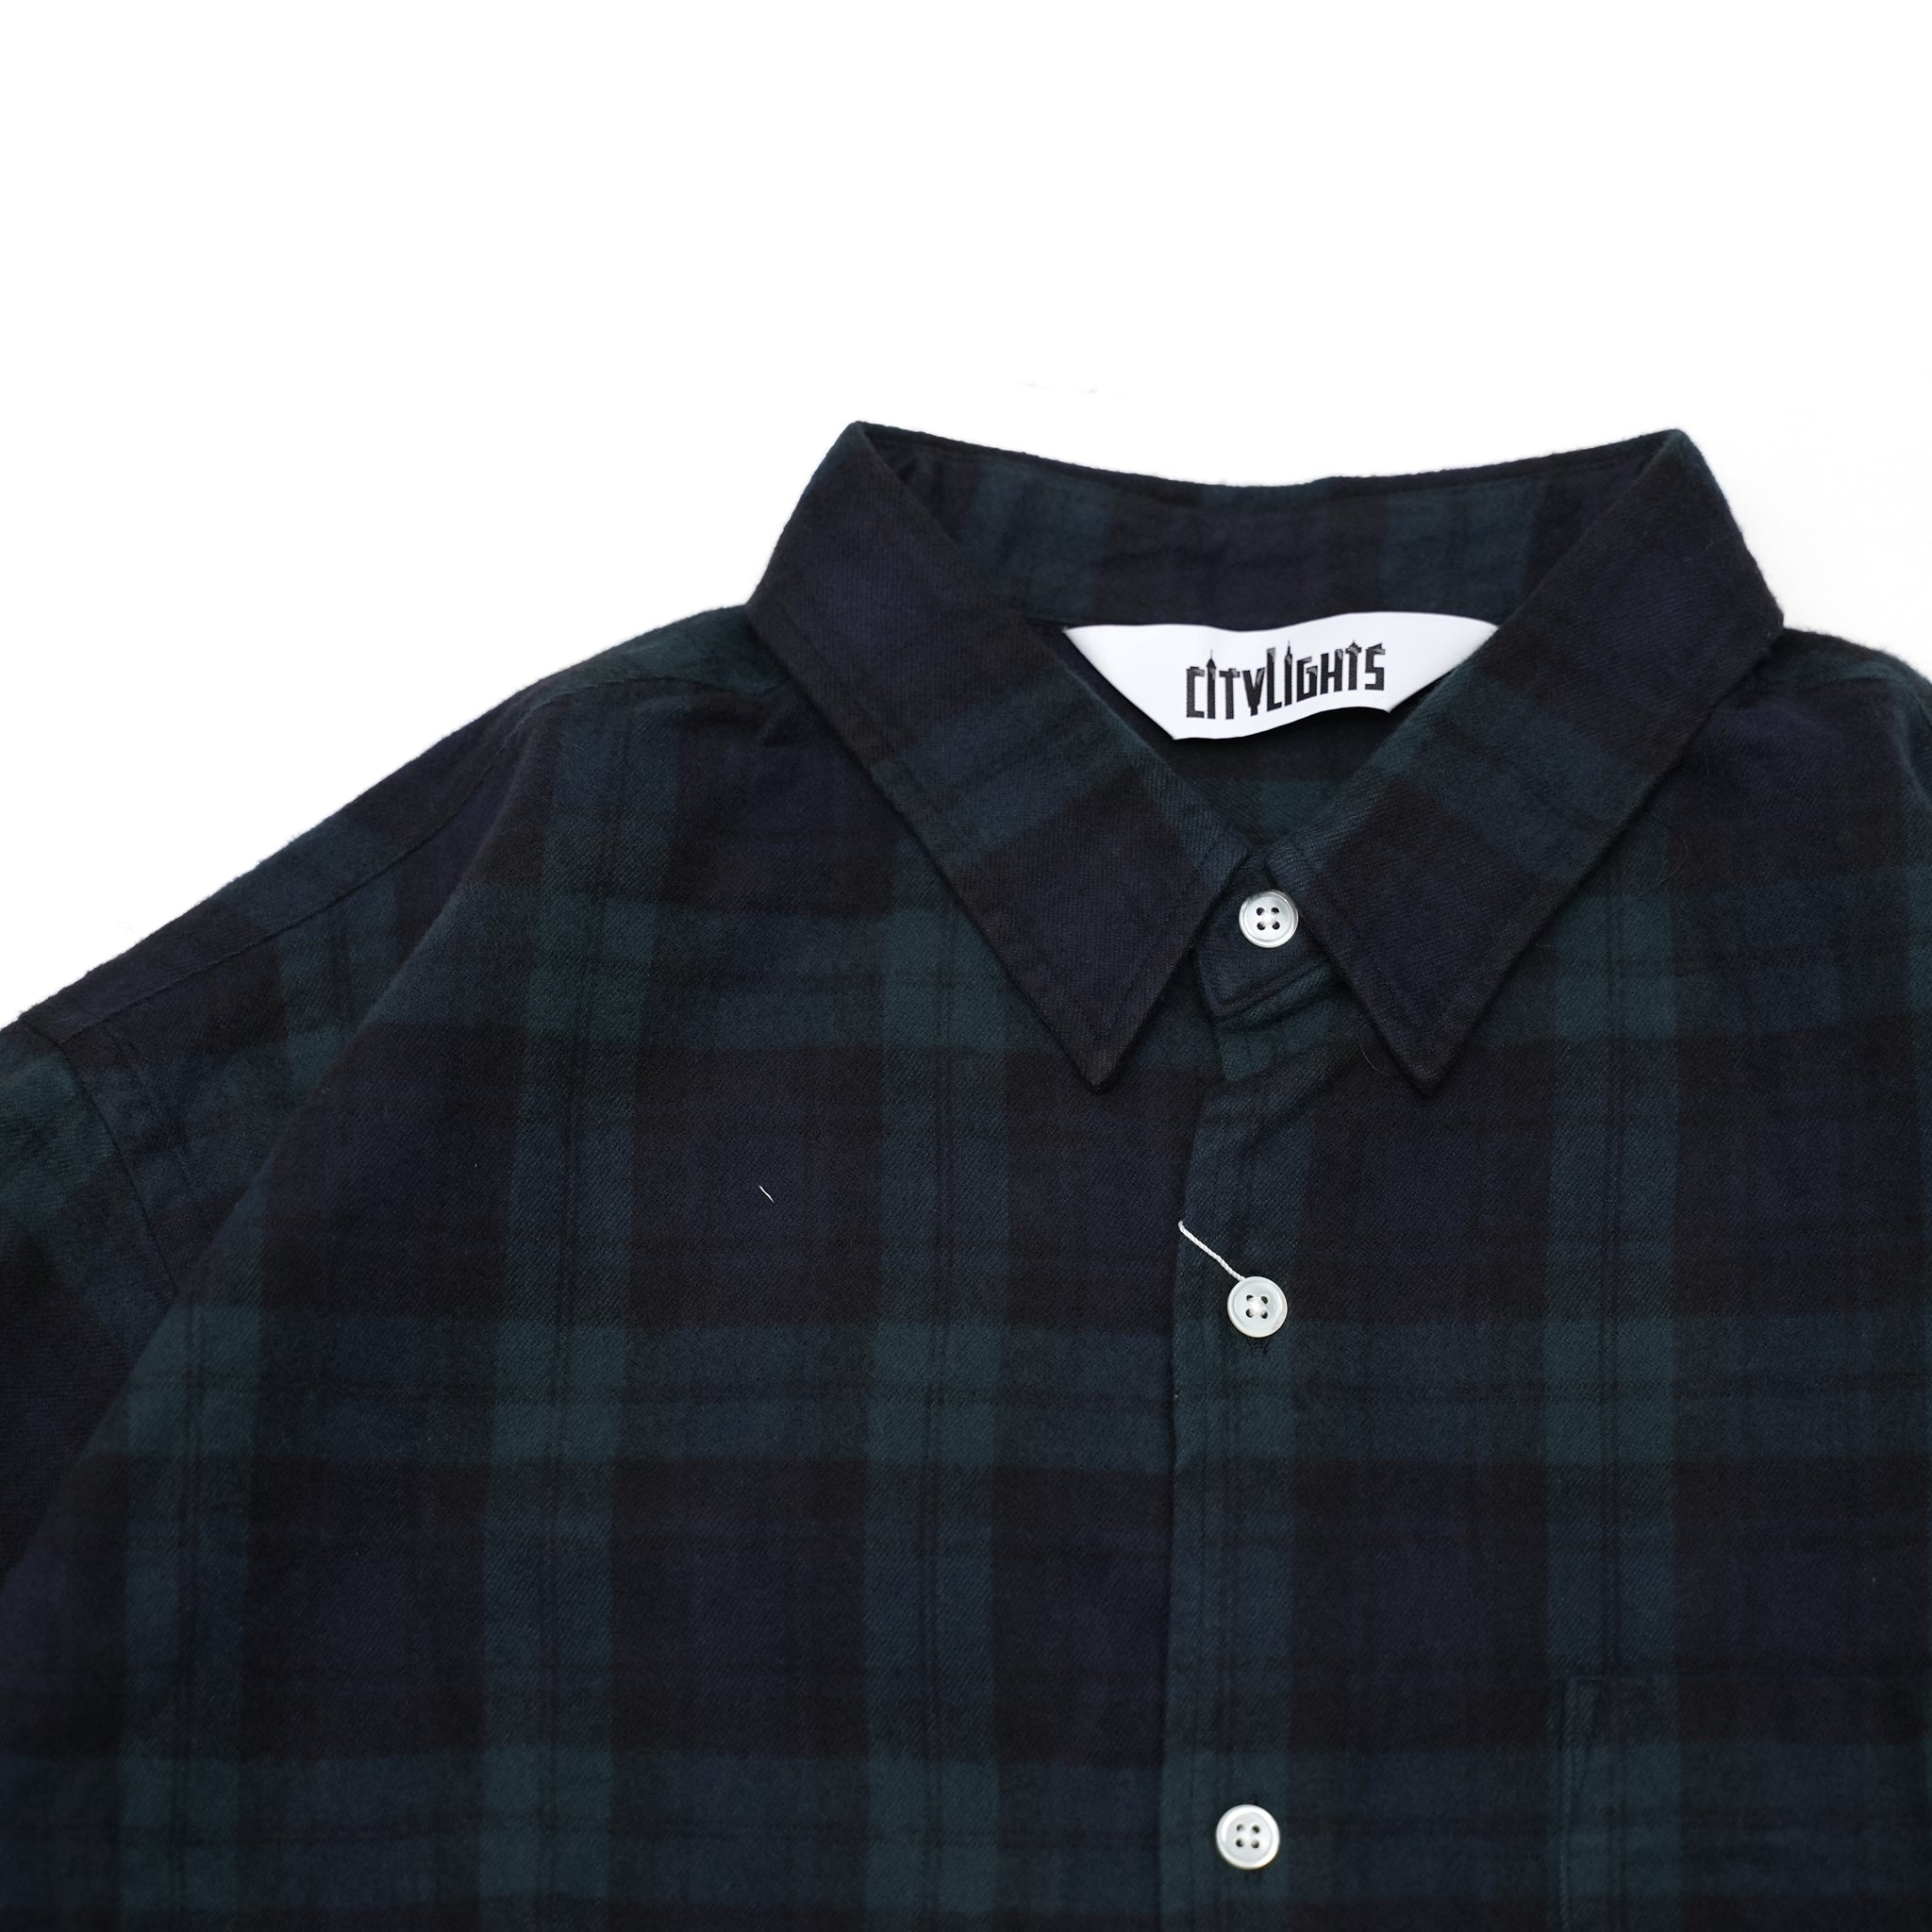 Name:OG REG SHIRTS | Color:BLACKWATCH | Size:Regular/Tall 【CITYLIGHTS PRODUCTS_シティライツプロダクツ】